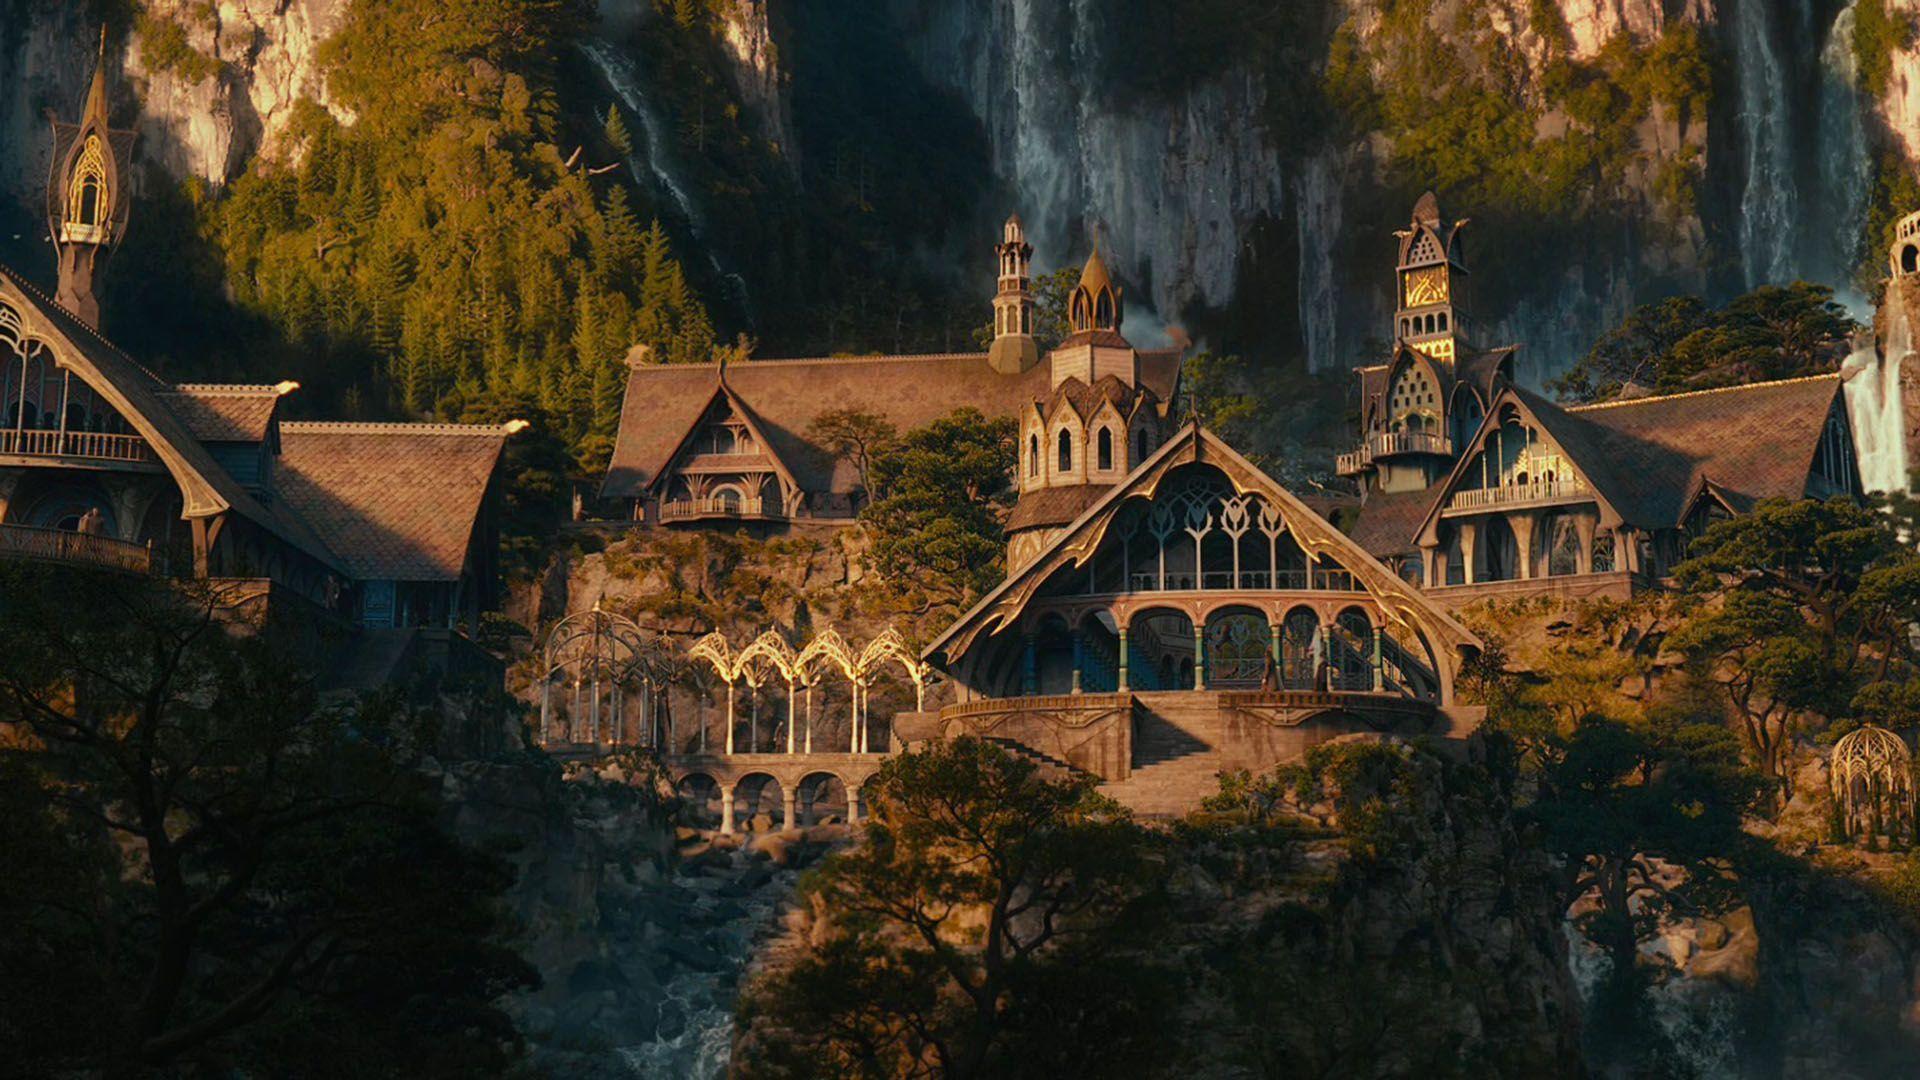 Appealing Rivendell Wallpaper 1920x1080PX Amazing The Hobbit